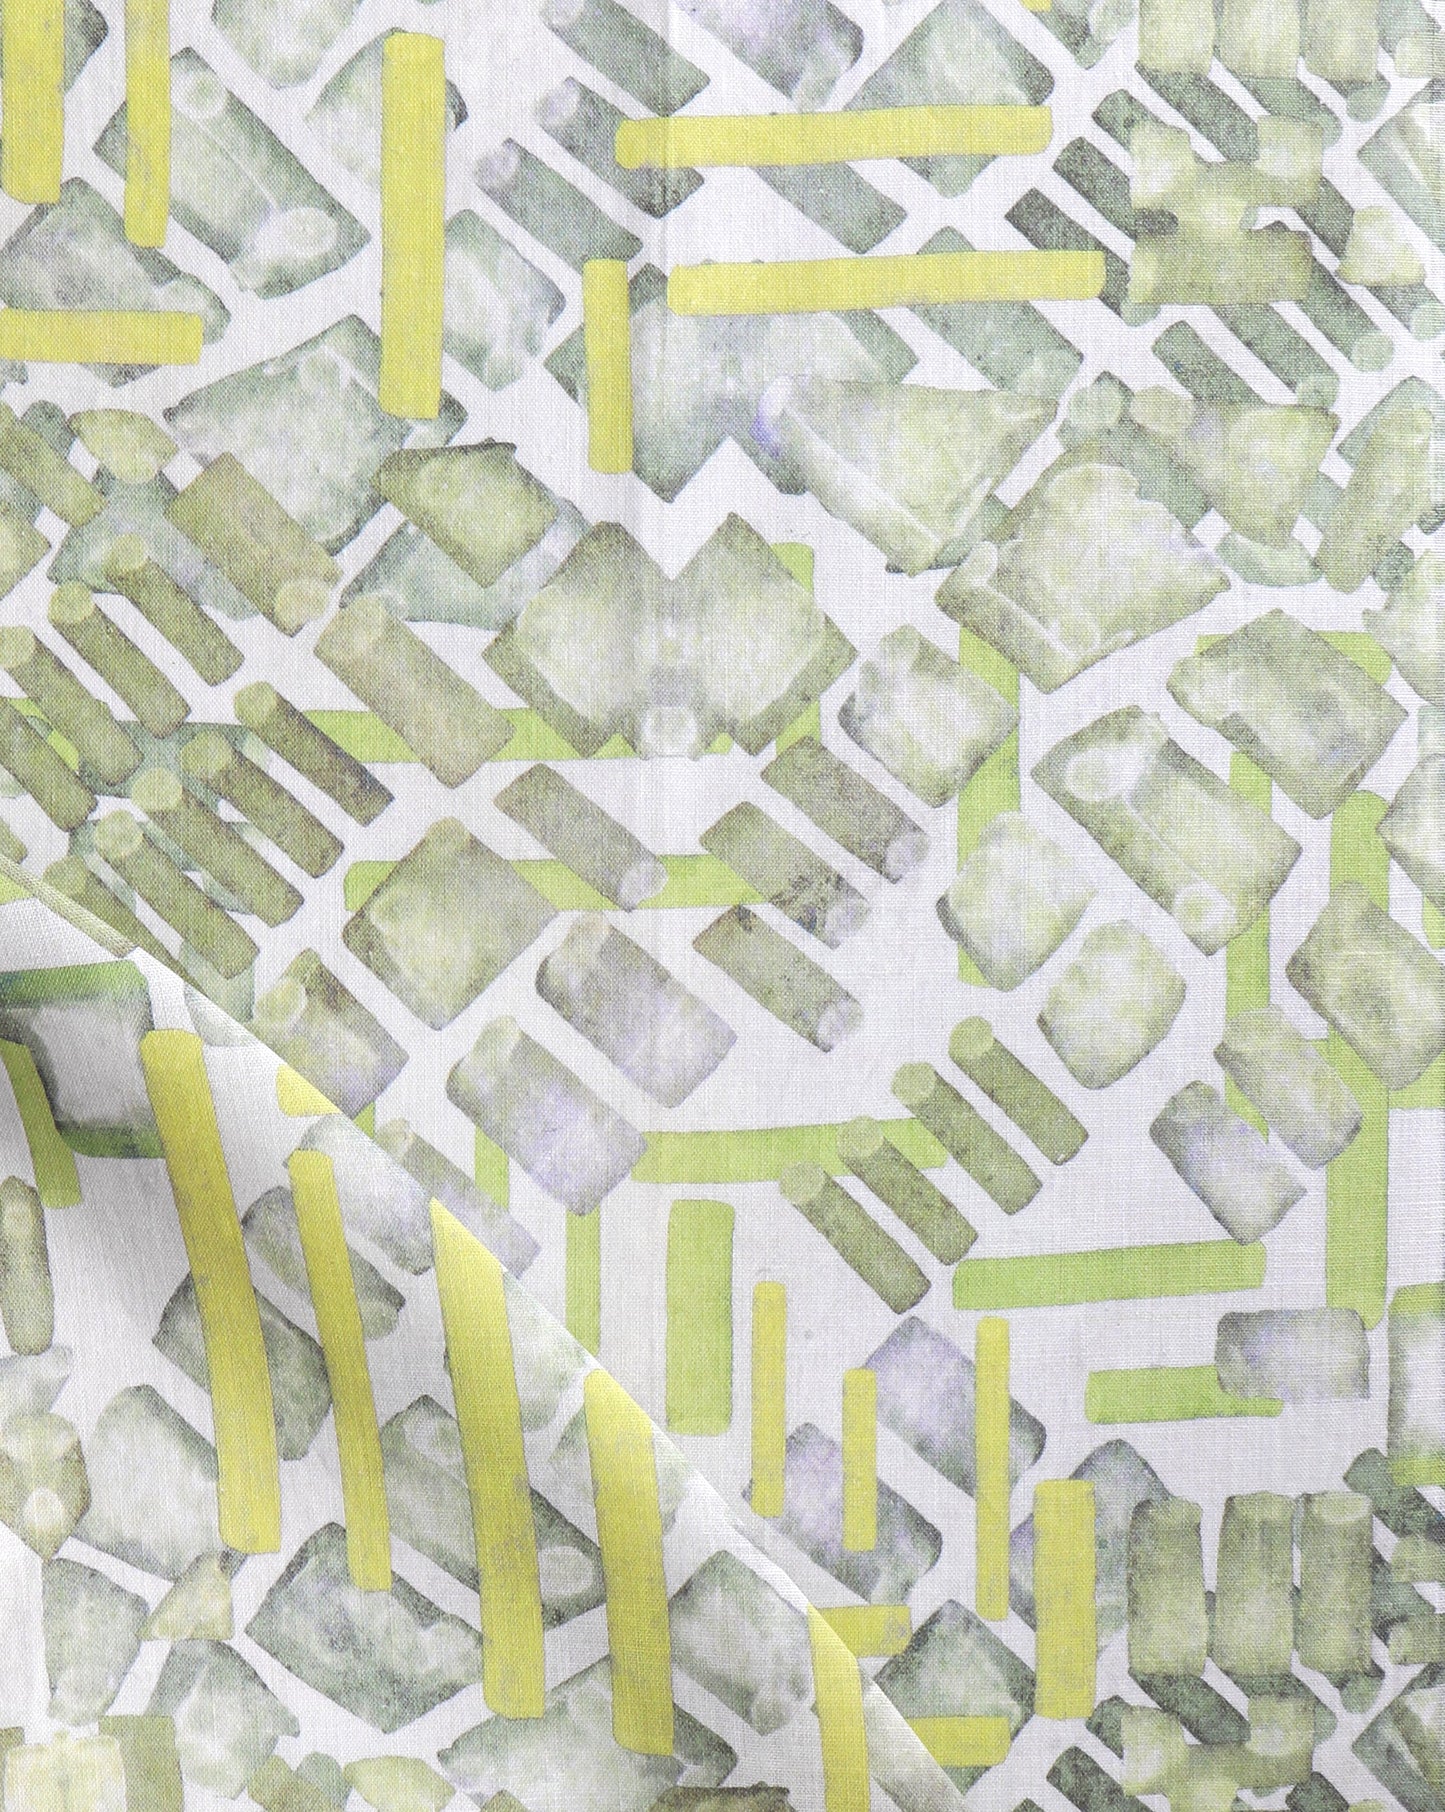 A luxury high-end Stele Fabric Citrus pattern in green and yellow on a white background